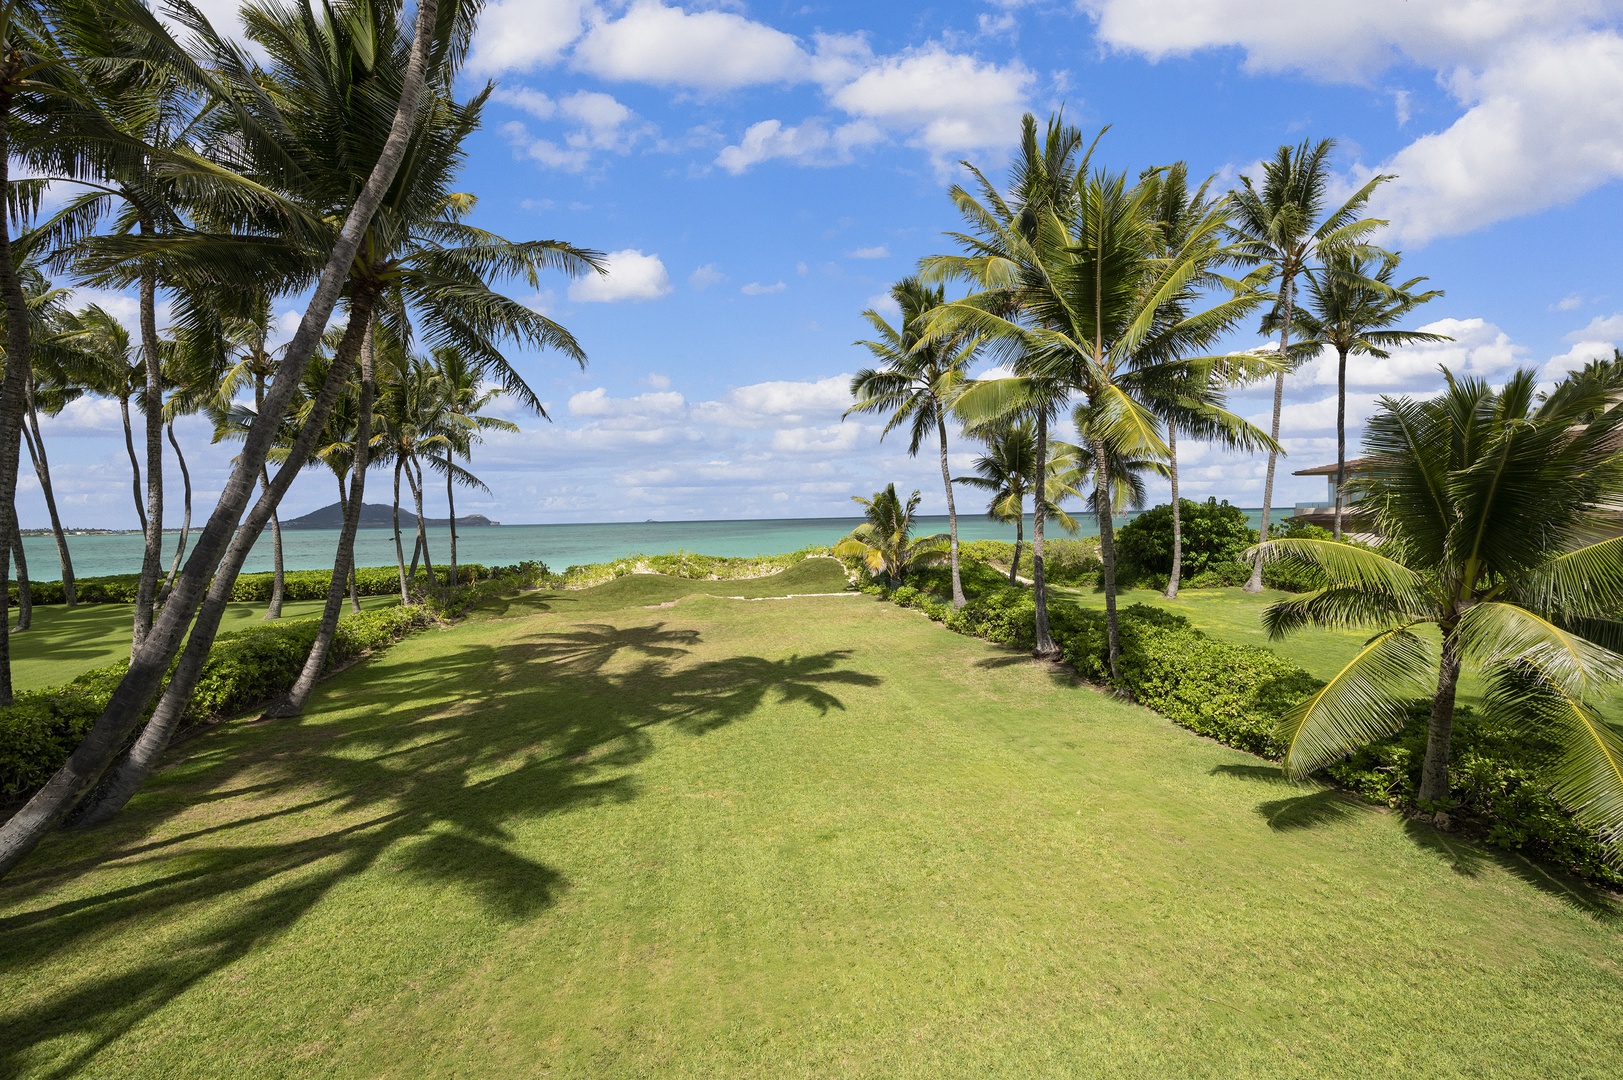 Kailua Vacation Rentals, Kailua Hale Kahakai - Immerse yourself in the natural beauty of the island right in your backyard